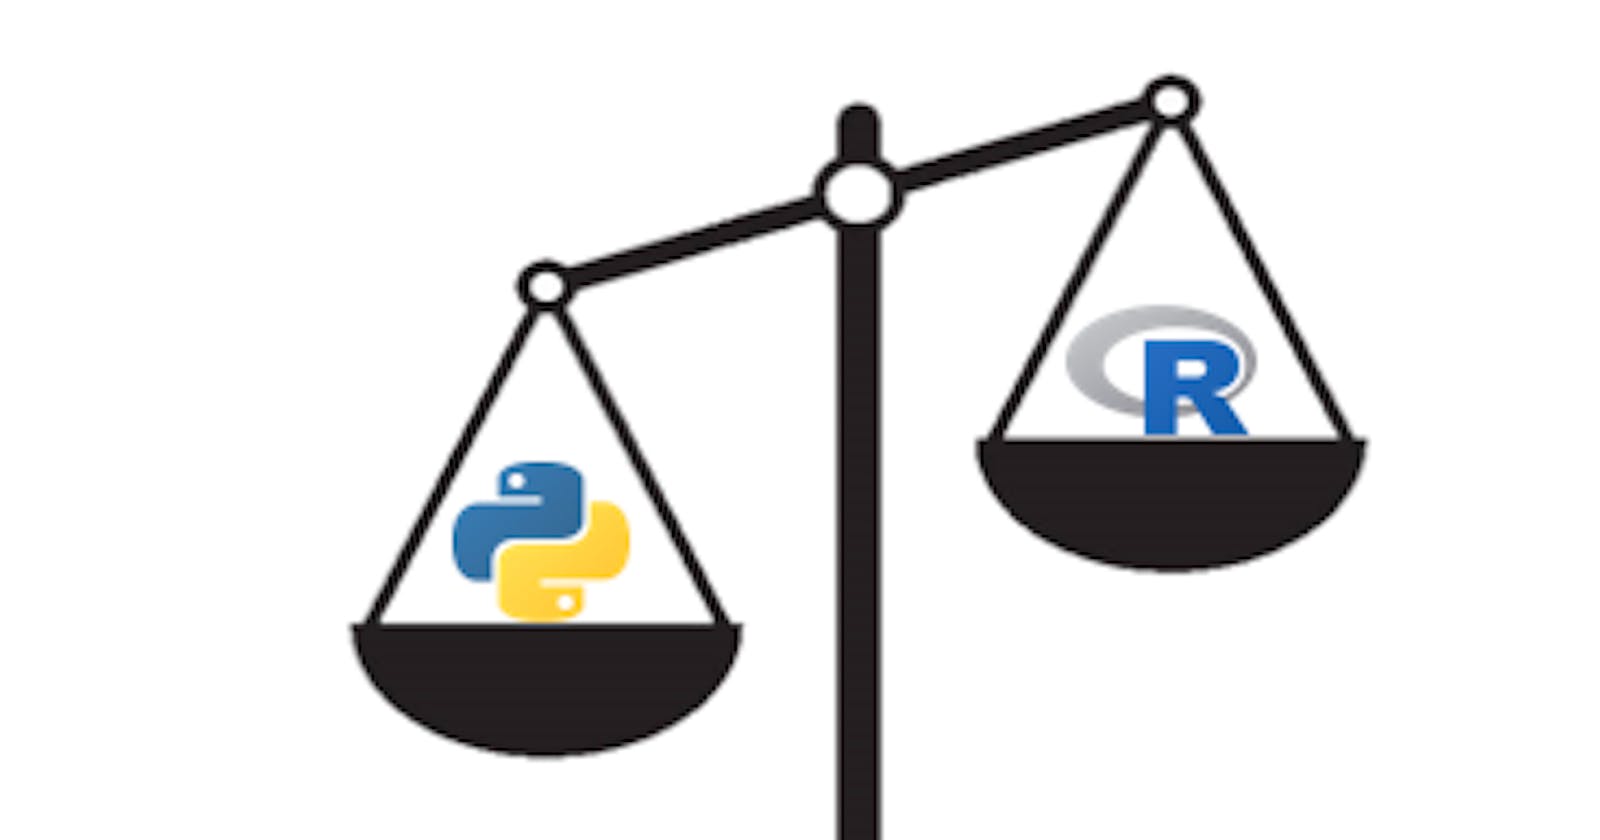 Which one is better? Python or R?